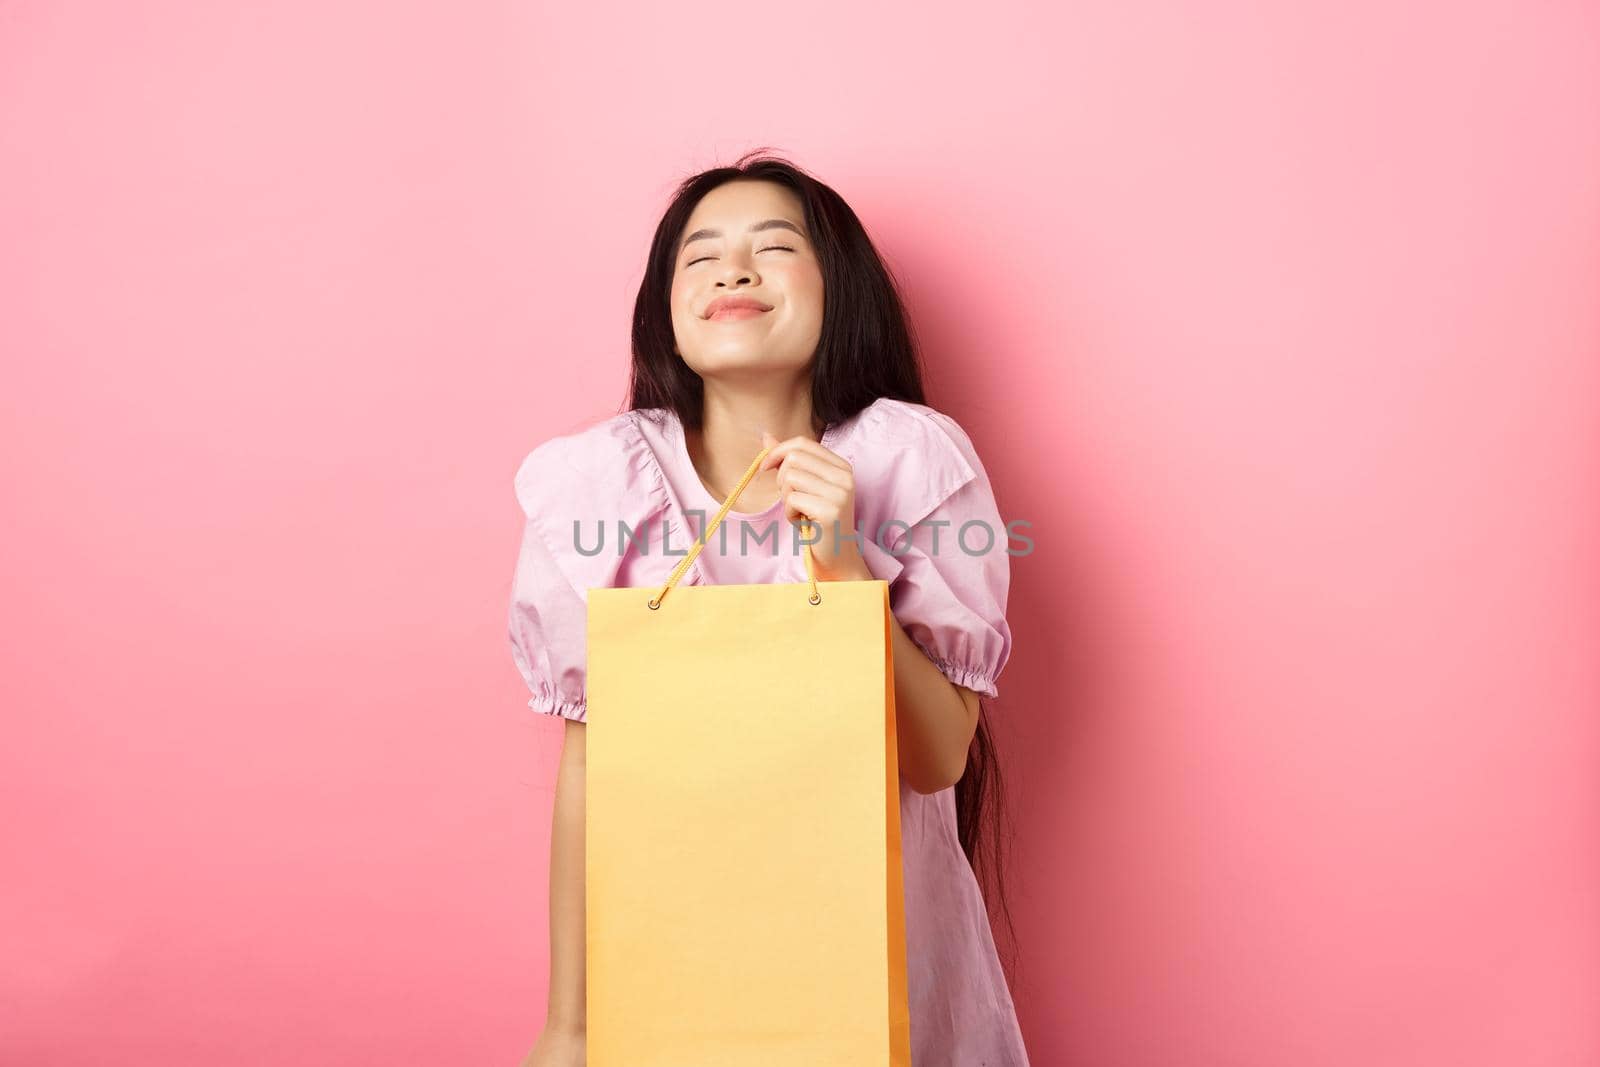 Beautiful happy asian woman holding shopping bag, smiling with eyes closed, standing in dress against pink background.